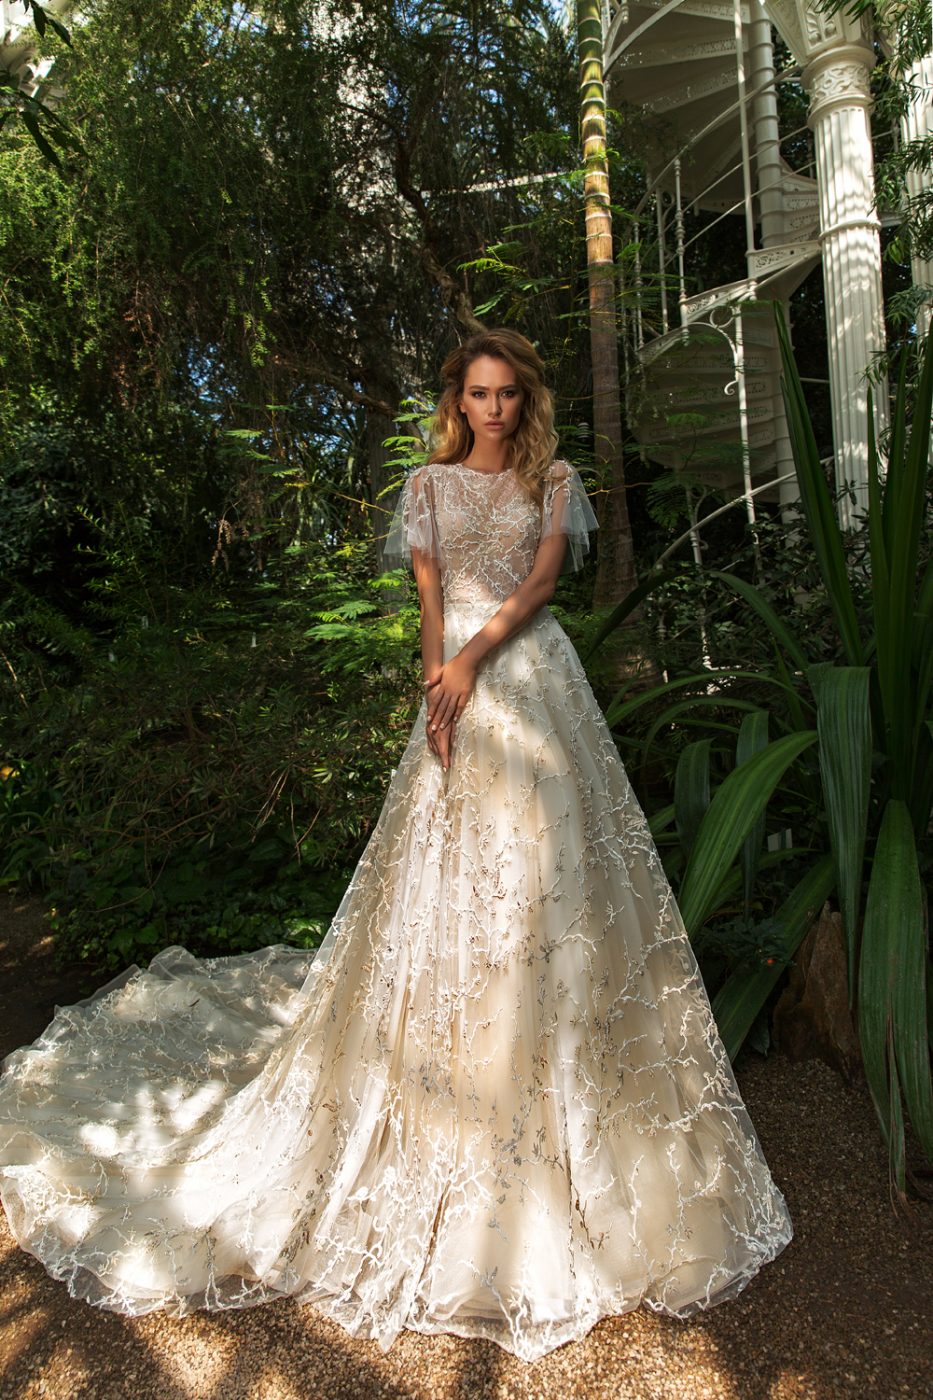 illusion flutter sleeve wedding dress by Crystal Design Couture